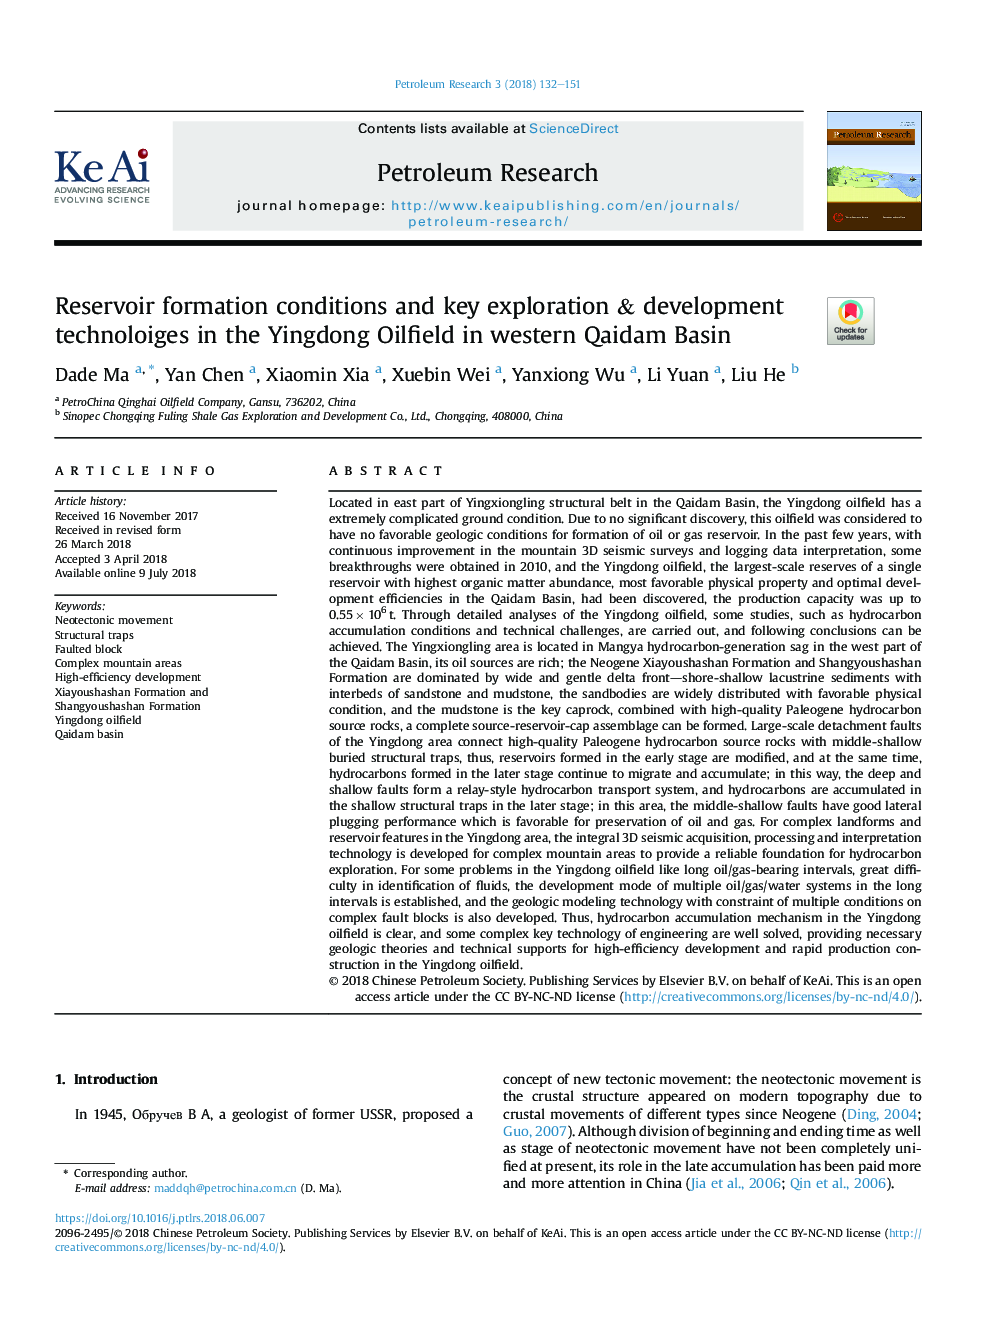 Reservoir formation conditions and key exploration & development technoloiges in the Yingdong Oilfield in western Qaidam Basin